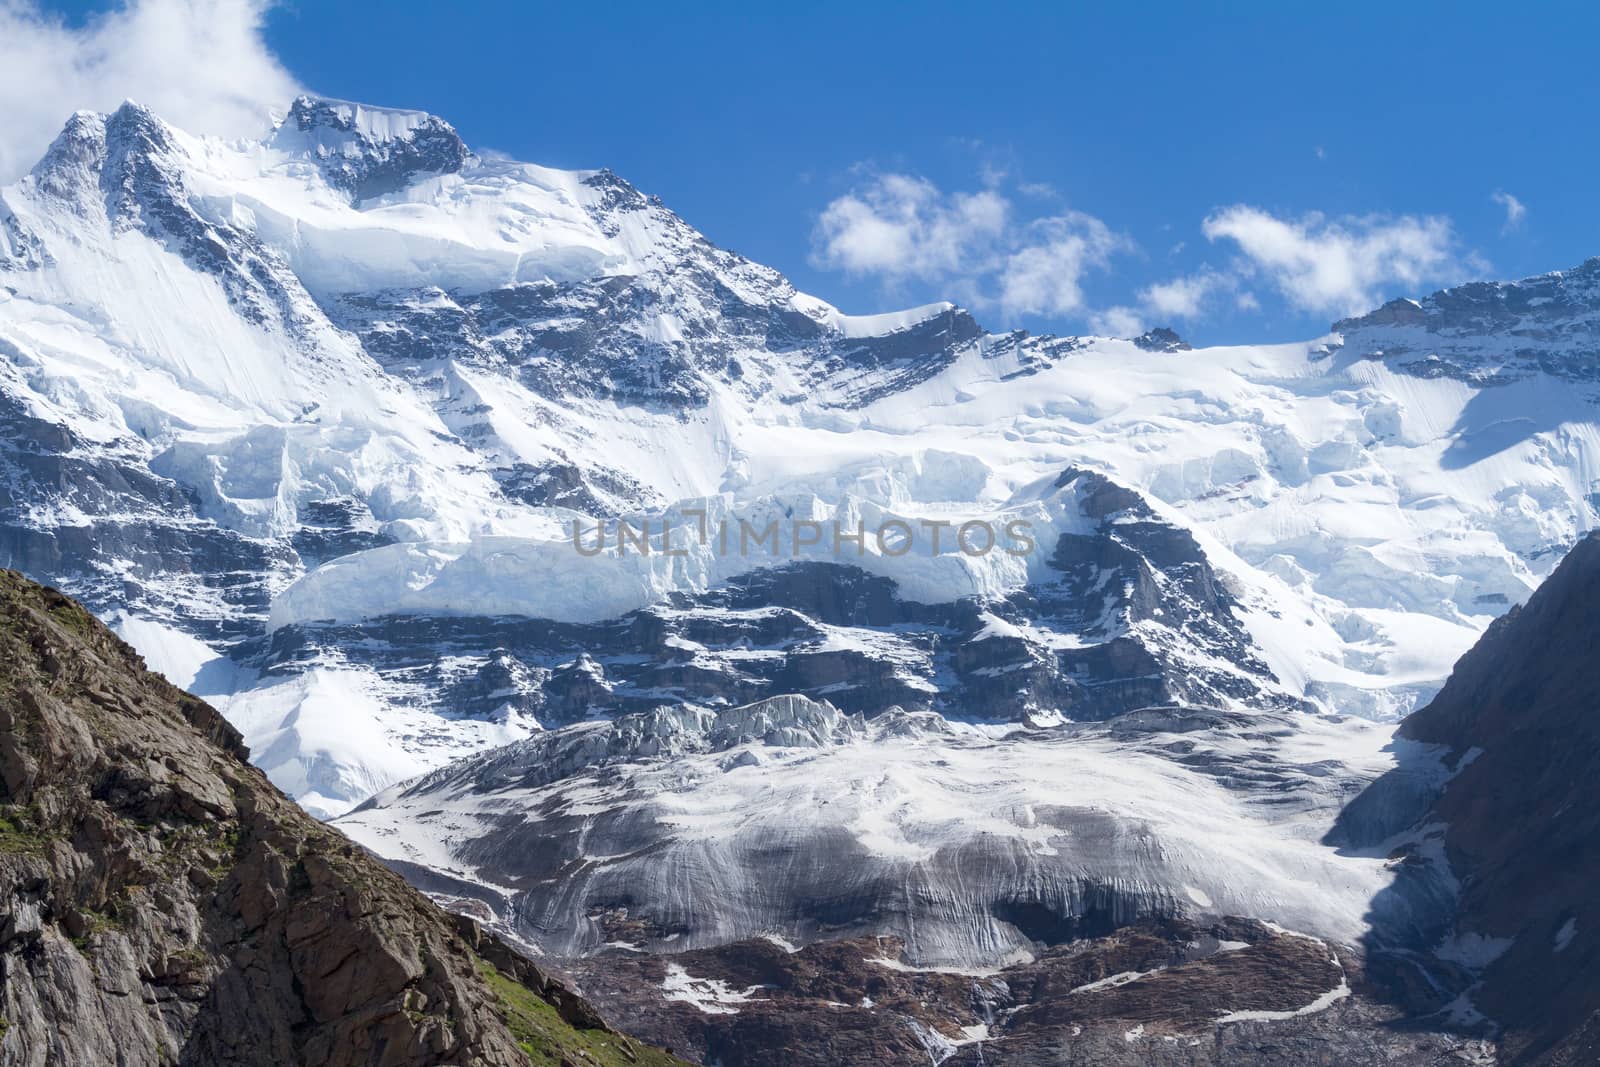 Glacier among the snow-capped Himalayan peaks in Zanskar Valley in northern India